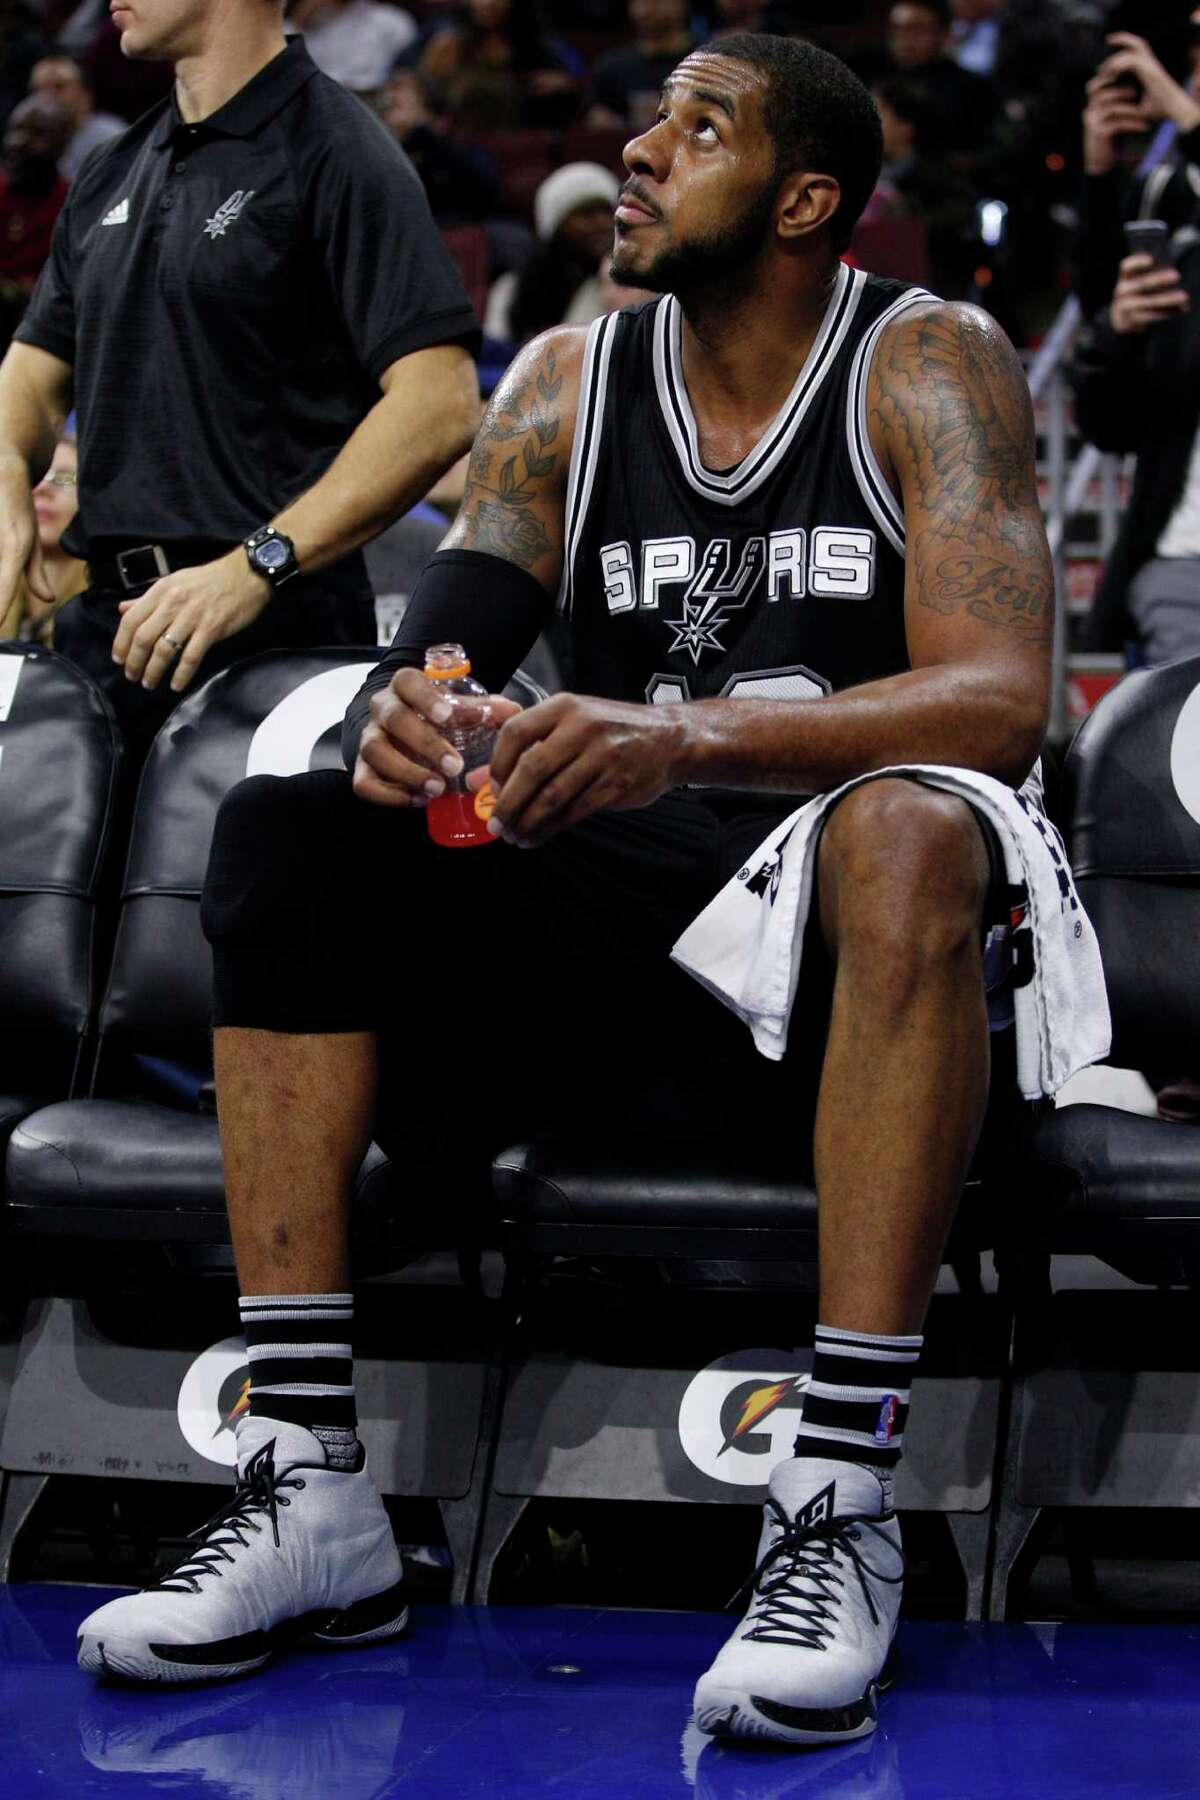 Spurs’ LaMarcus Aldridge looks on from the bench during the second half against the Philadelphia 76ers.